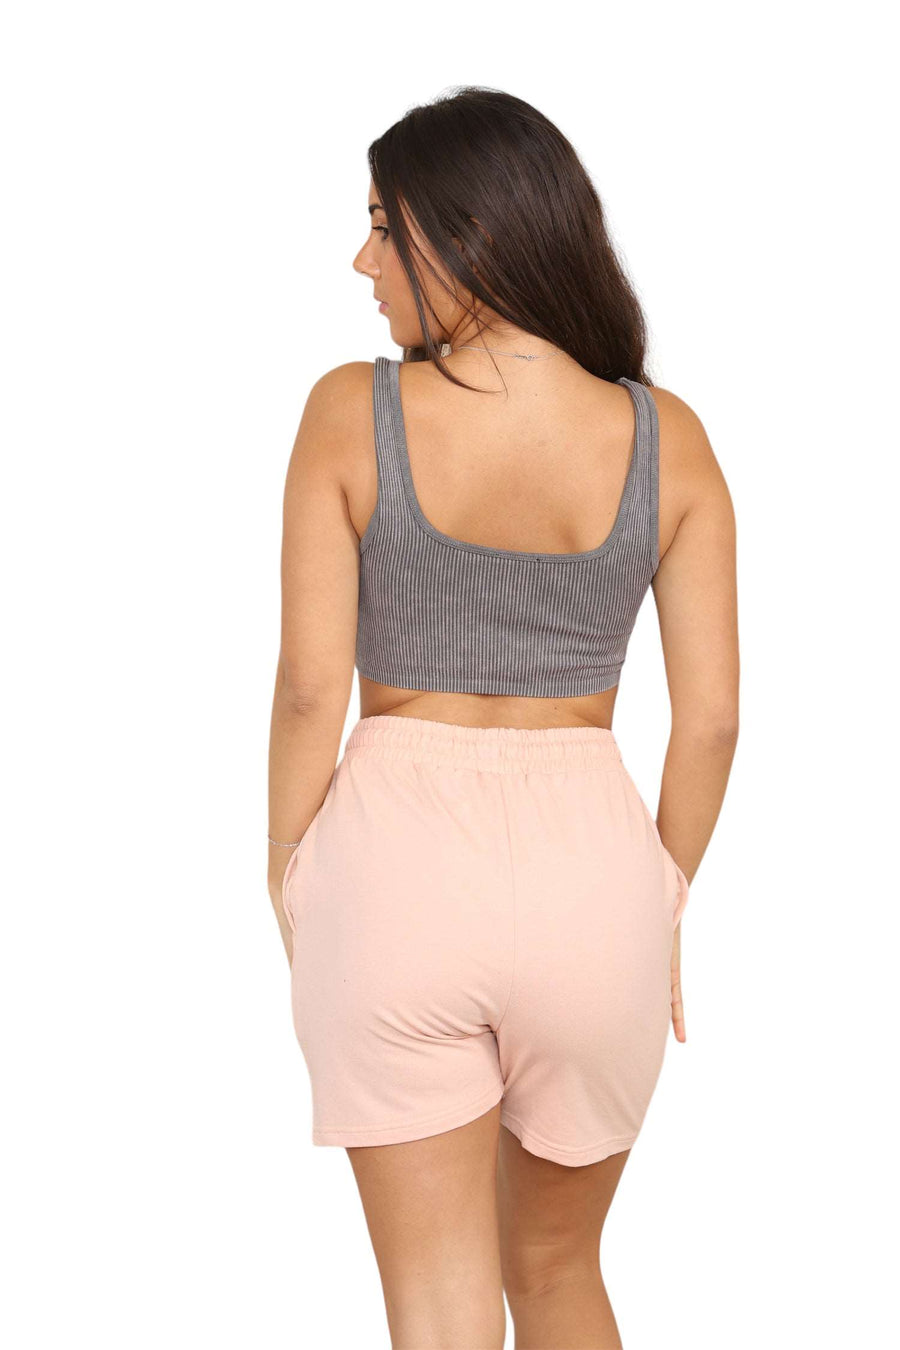 Comfy Mid-Length Pink Cycling Shorts for Women!